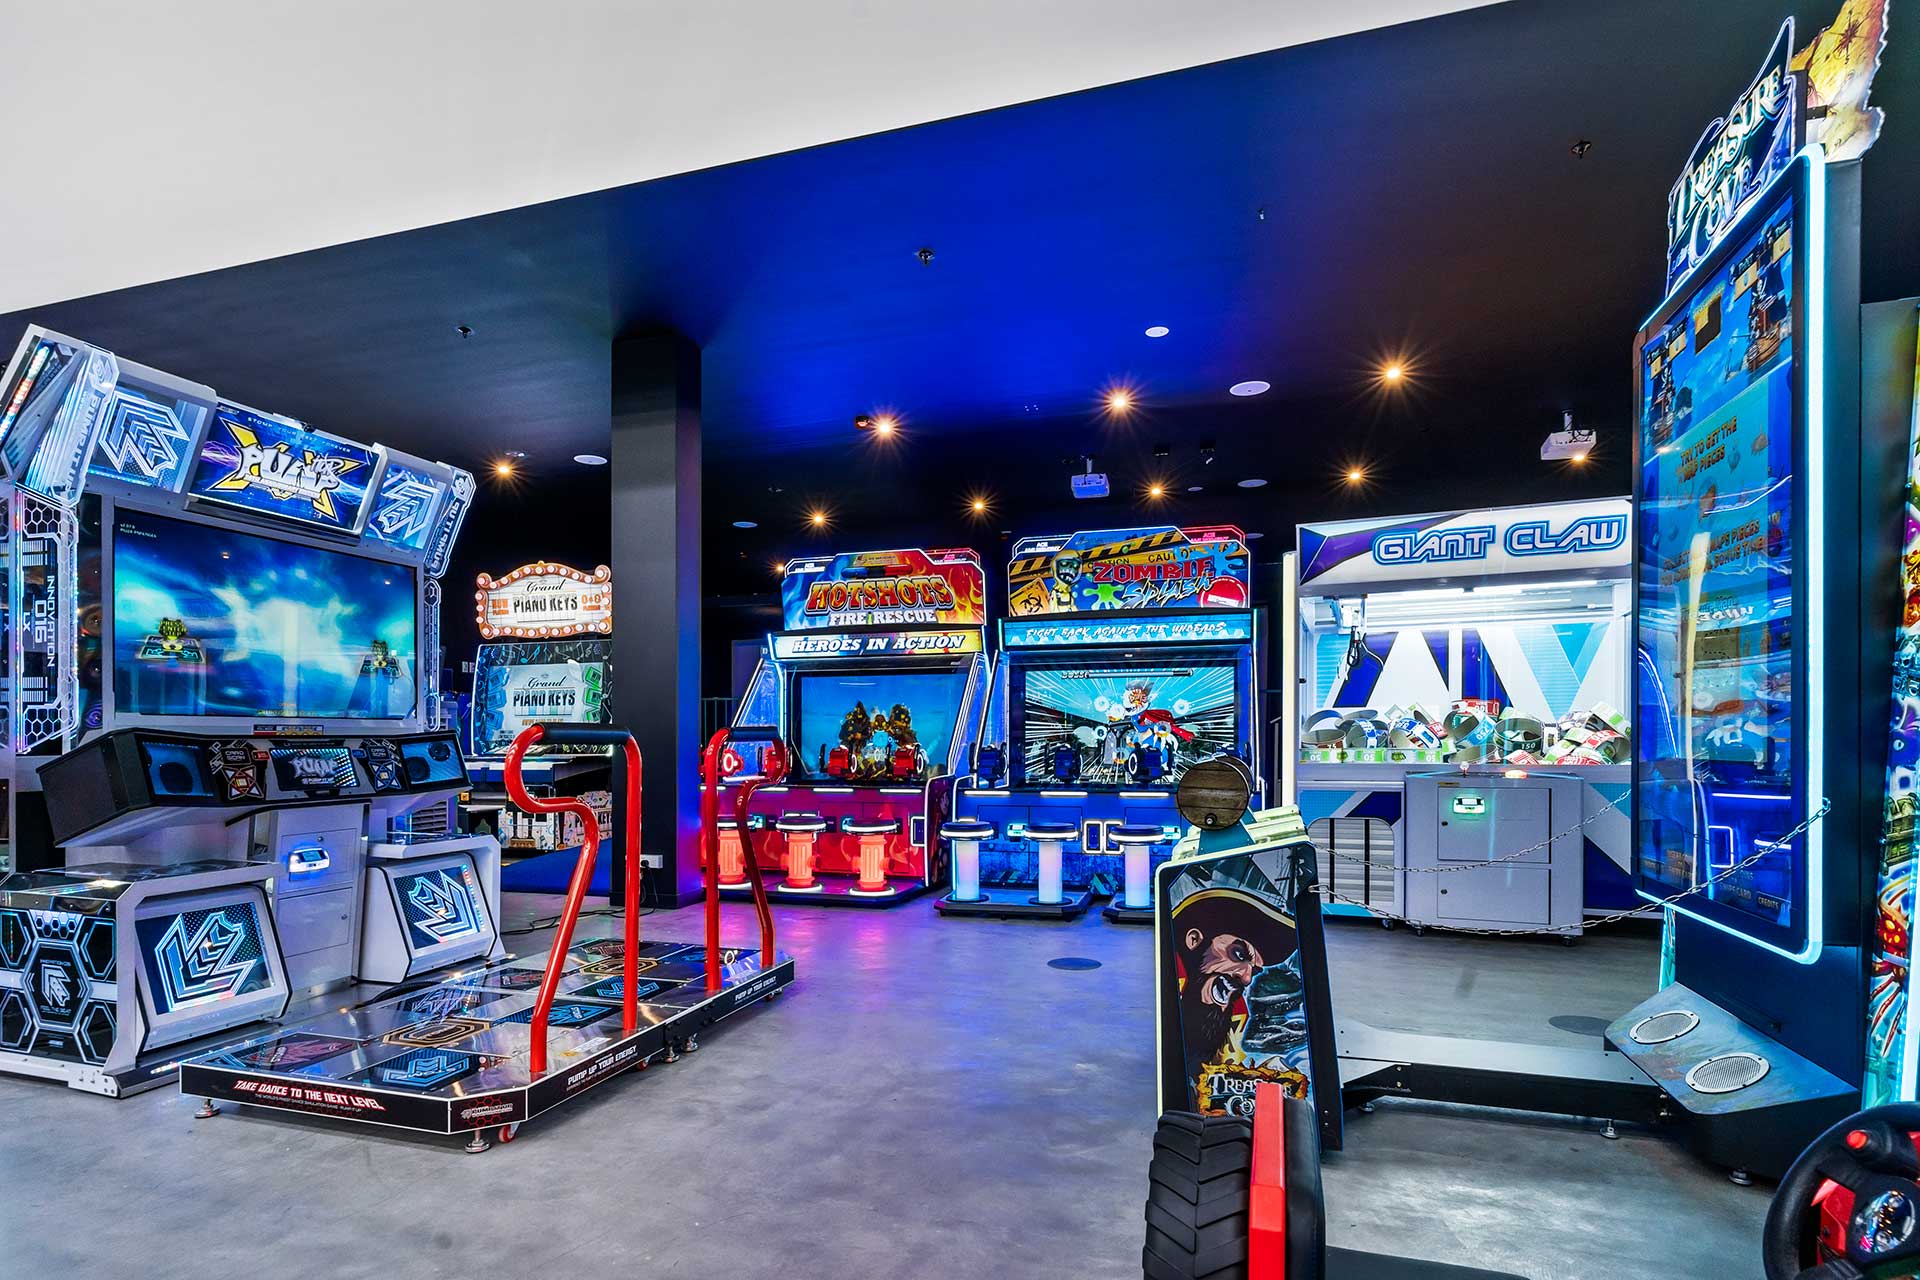 We have all of your favourite arcade games, including everything from Mario-Kart to Dance Dance Revolution, to the NBA hoops. We even have a range of captivating simulators with themes such as Jurassic Park, and the wild west.